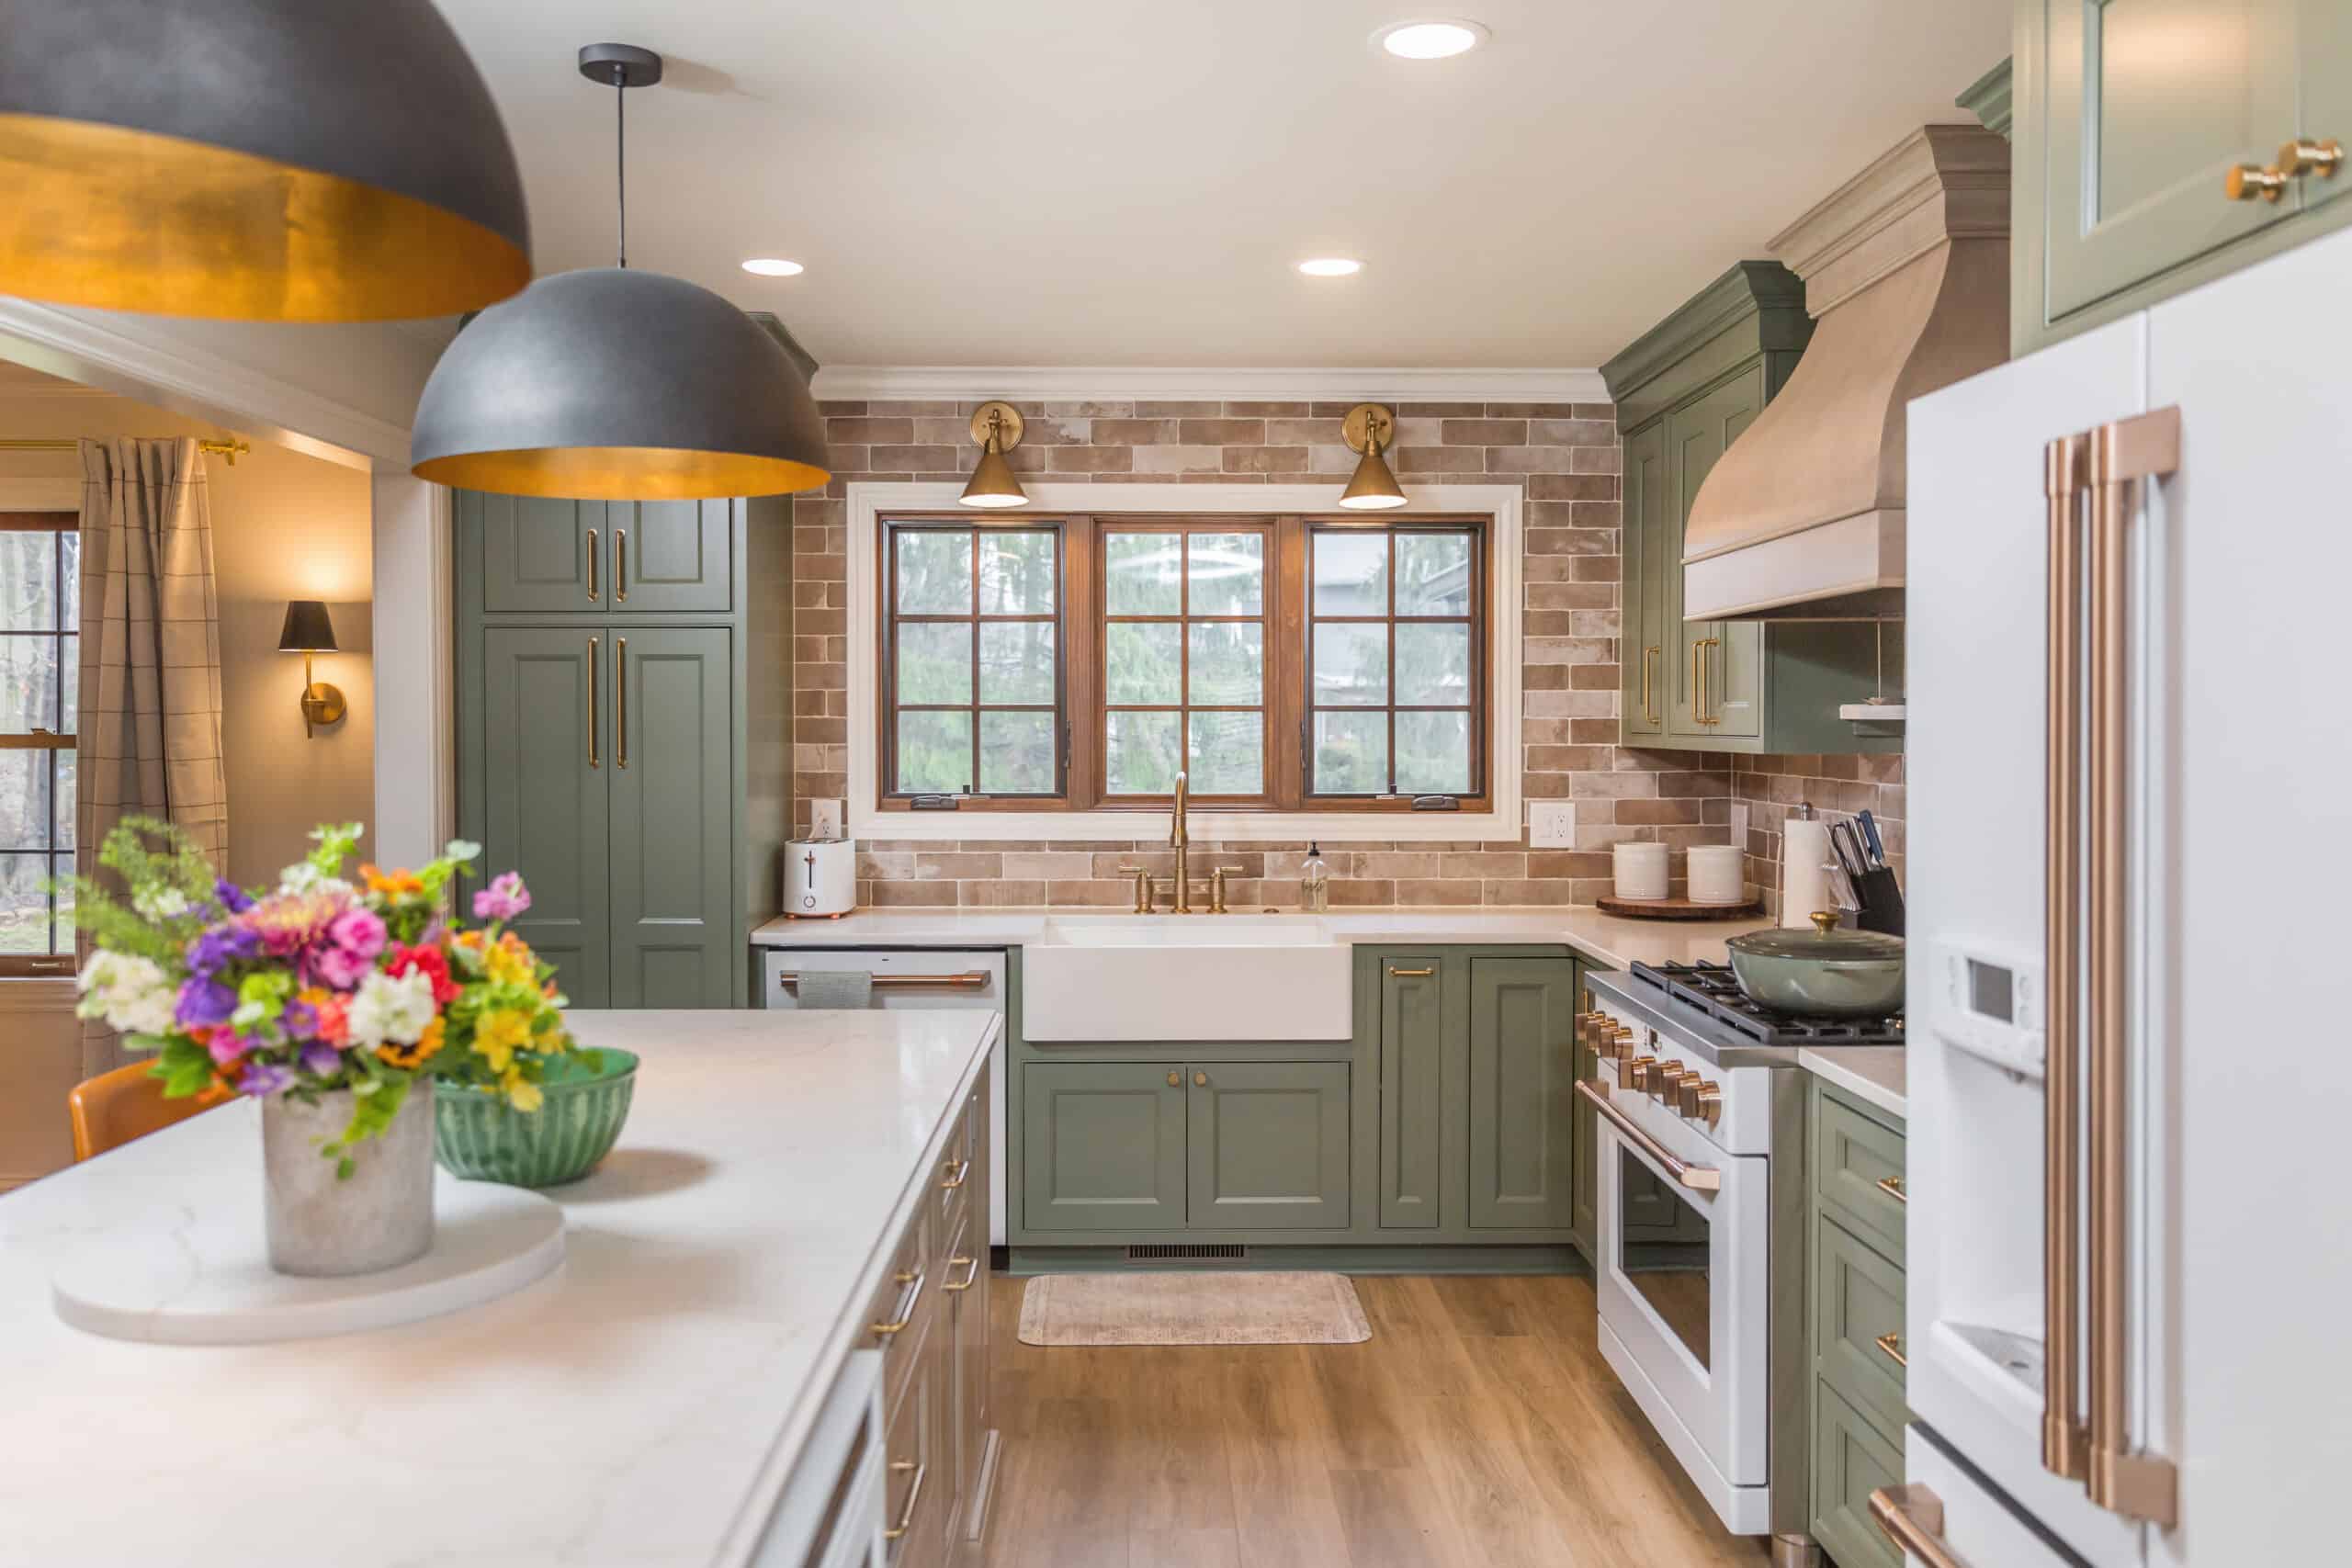 Nicholas Design Build | Modern kitchen with green cabinets, white countertops, and pendant lighting.